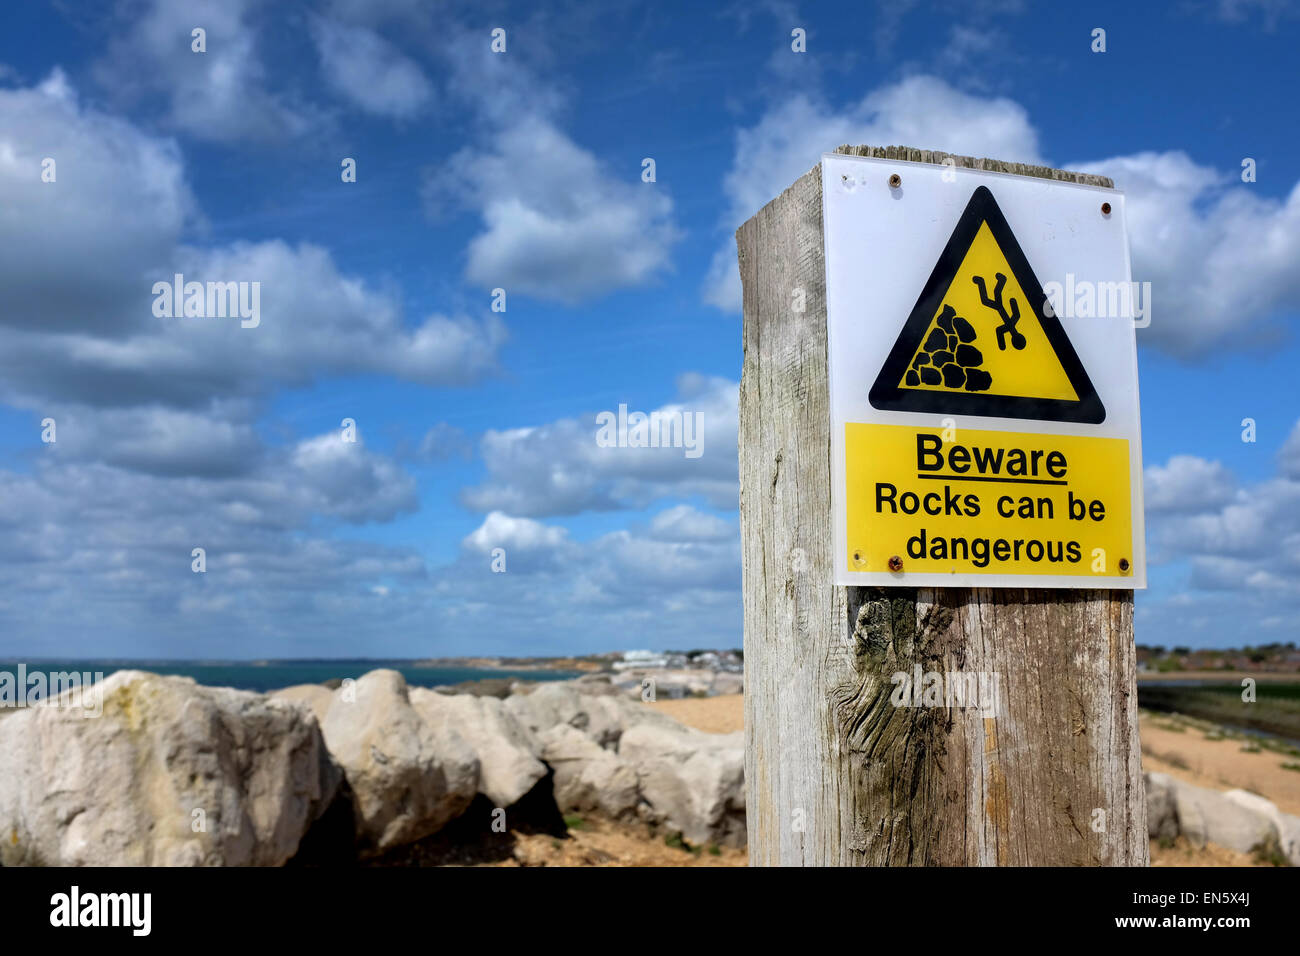 Rocks can be dangerous warning sign Stock Photo